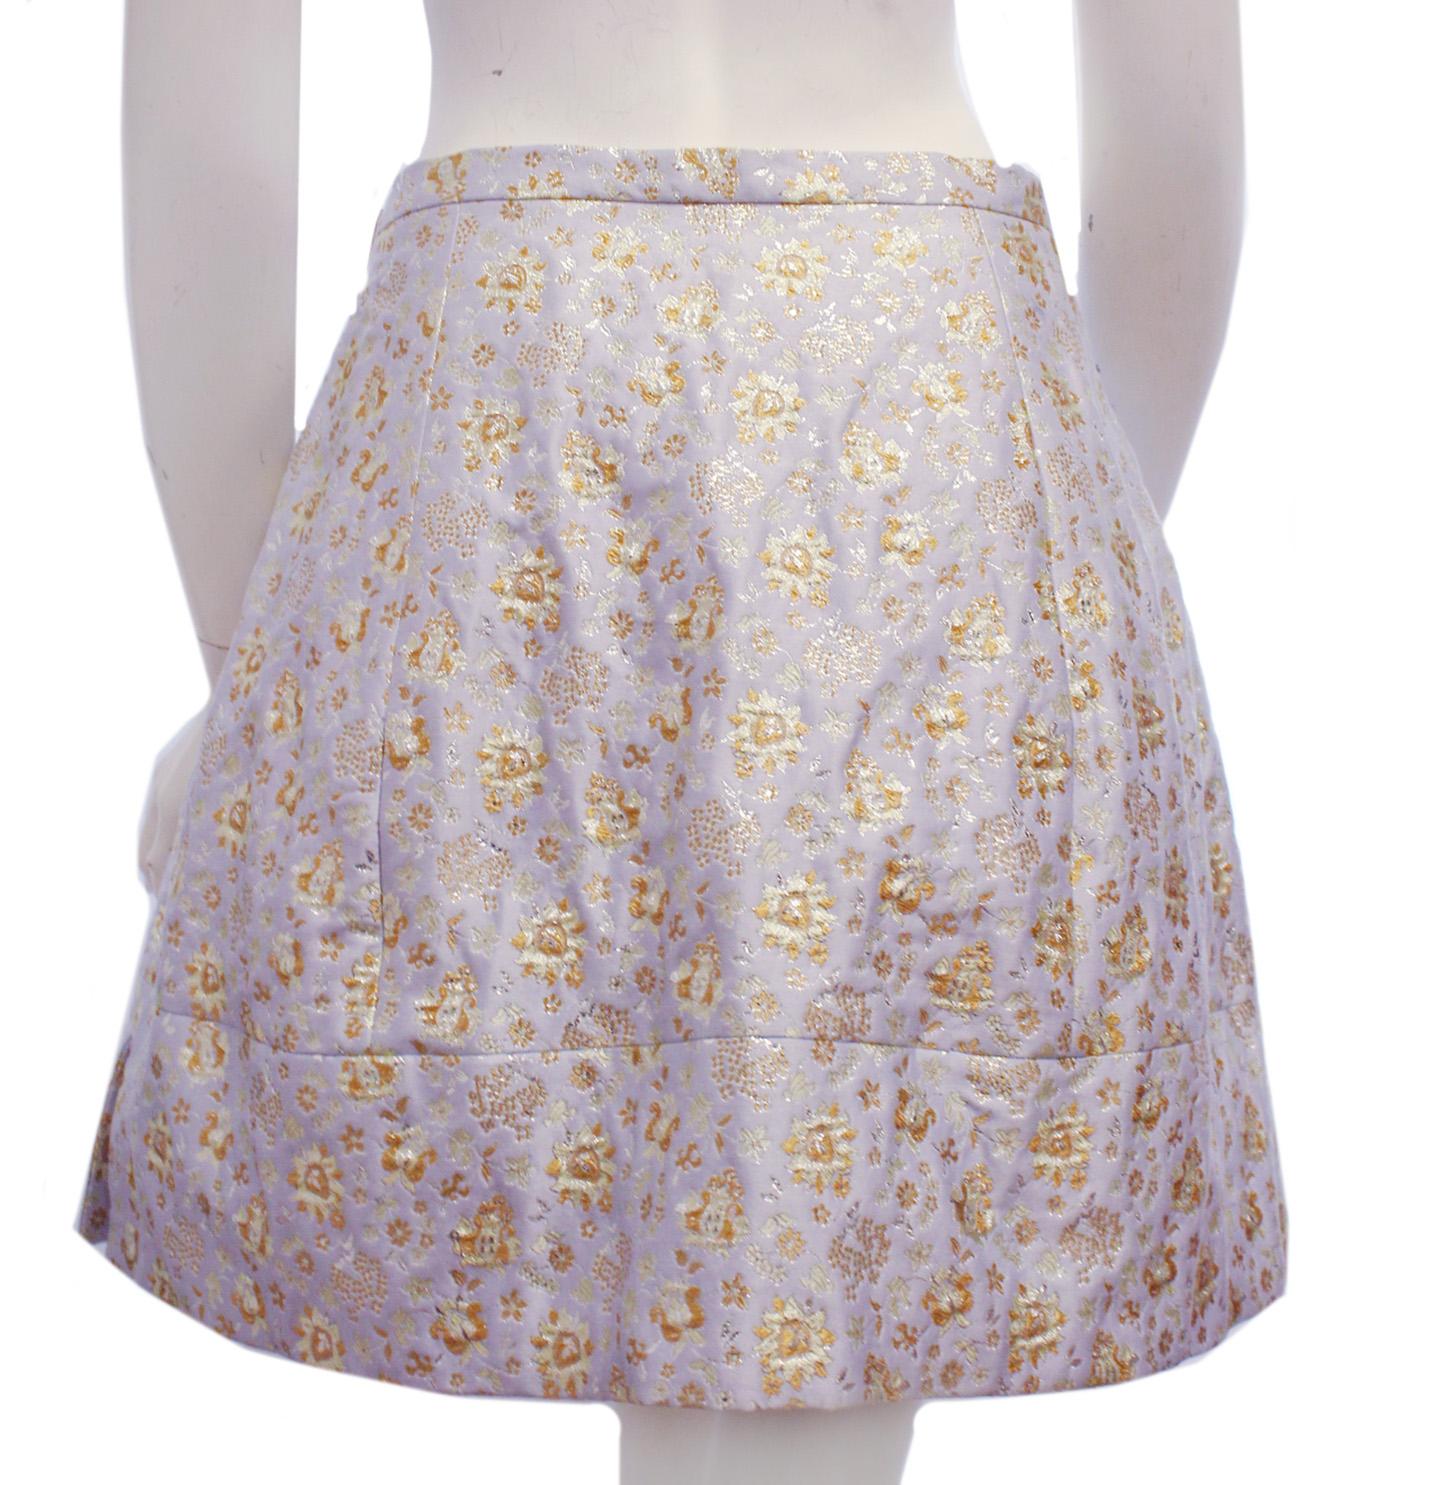 Gray Delpozo Floral Sky Blue Skirt Embroidered w/ Gold Metallic Threads 44 EU For Sale